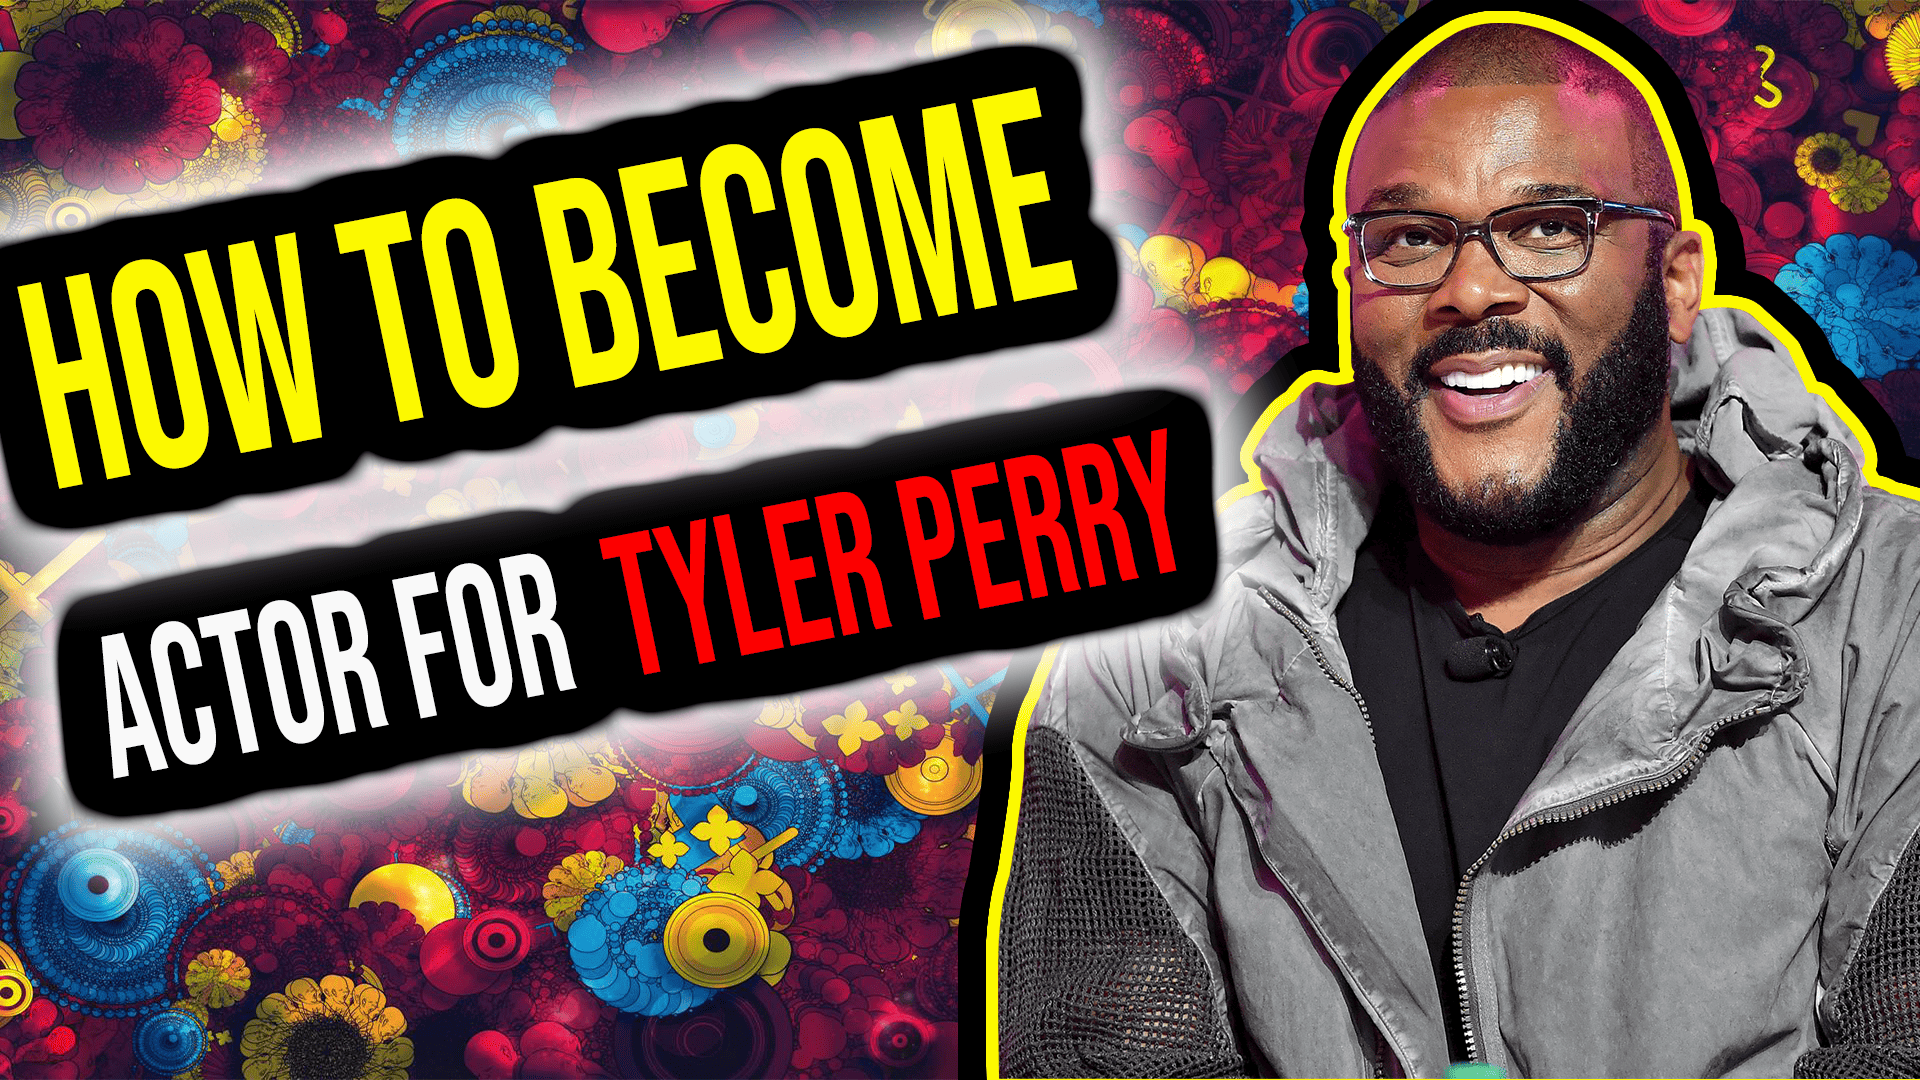 How To Become An Actor For Tyler Perry: Making It In The Industry